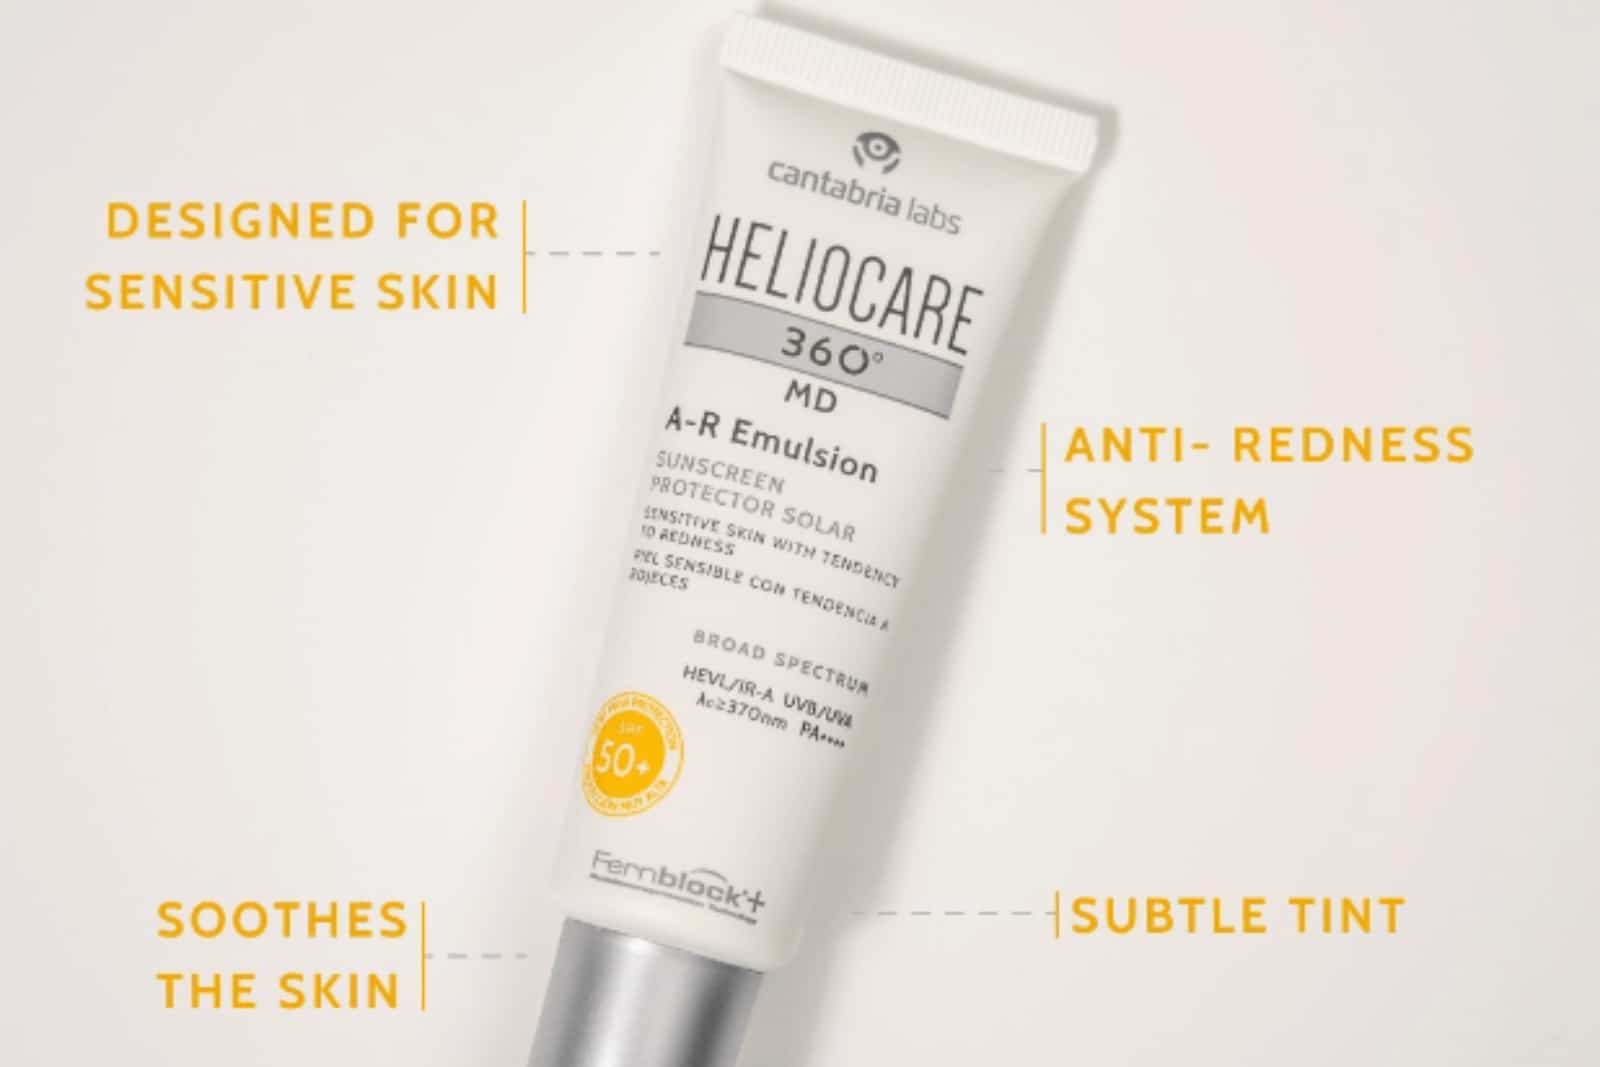 You are currently viewing New Heliocare 360° MD A-R Emulsion SPF50+